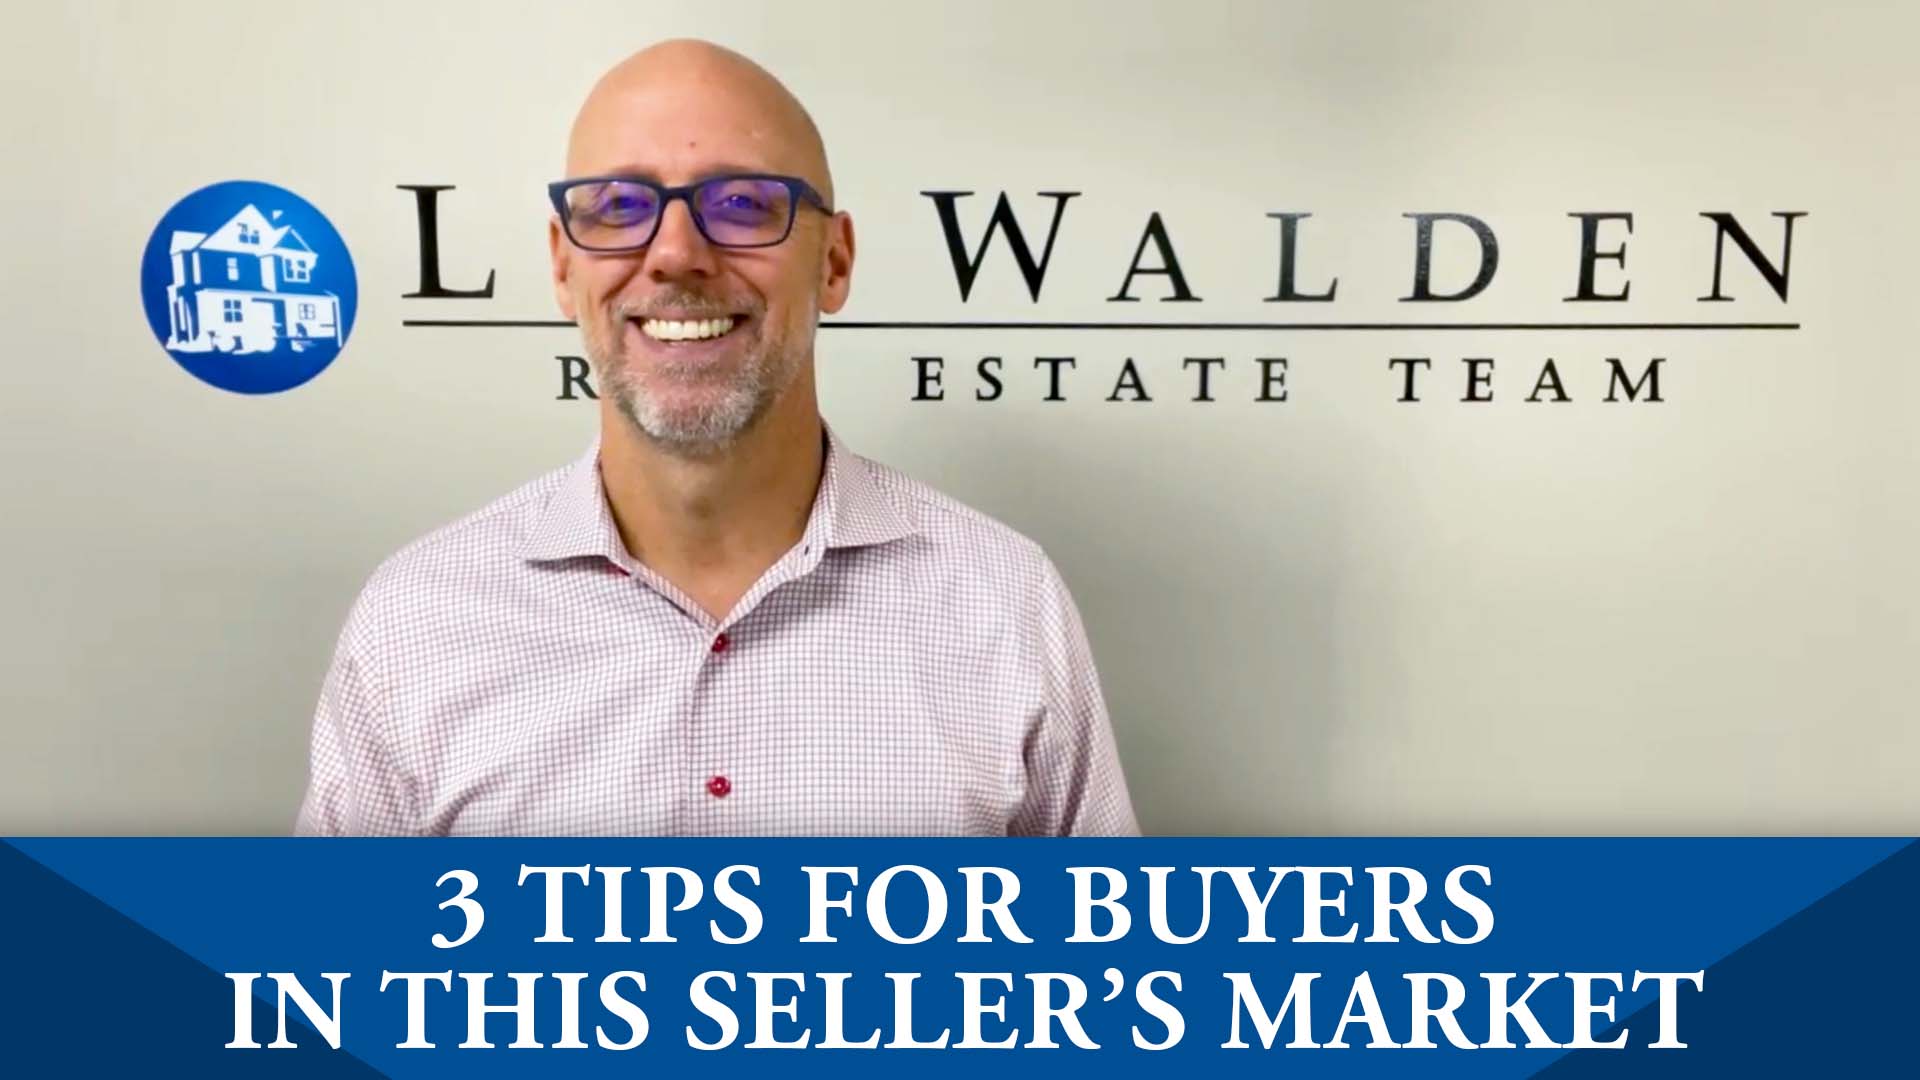 How Buyers Can Make the Most of This Seller’s Market